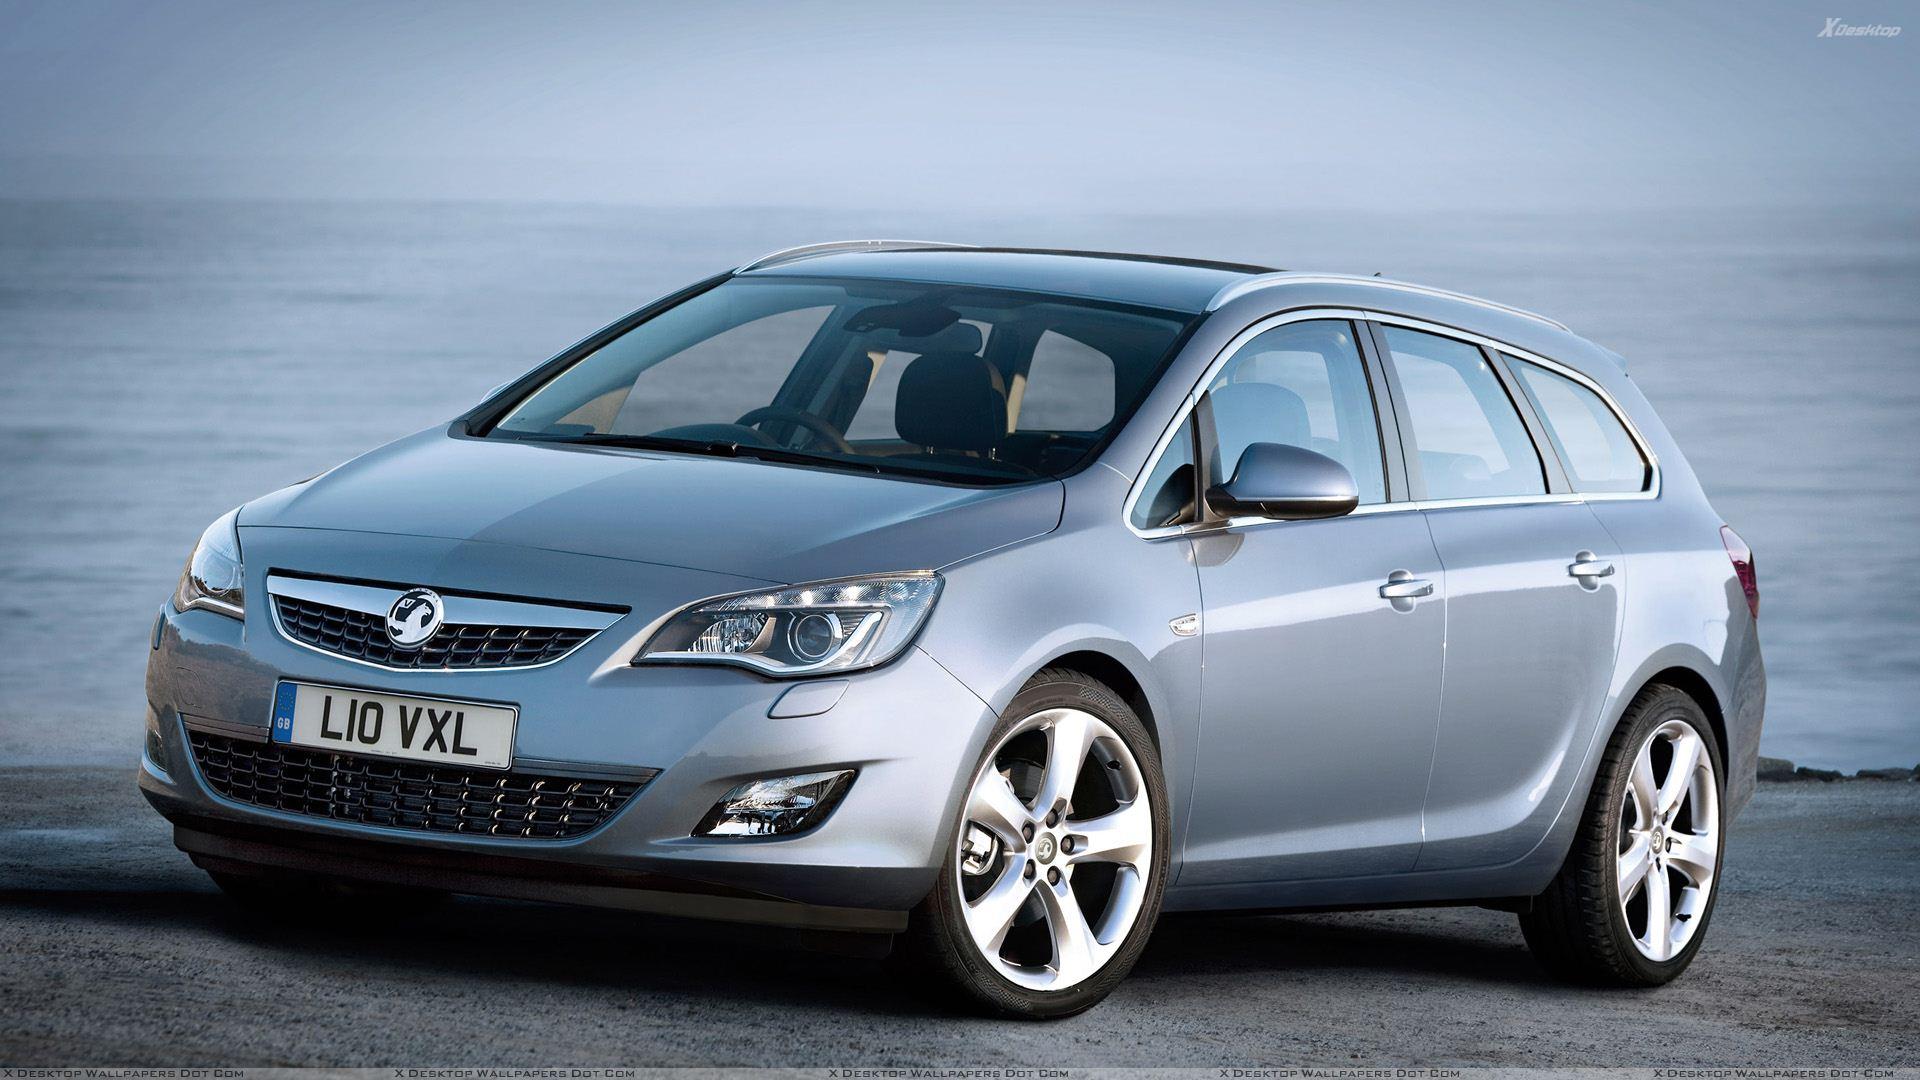 Vauxhall Astra Wallpaper, Photo & Image in HD